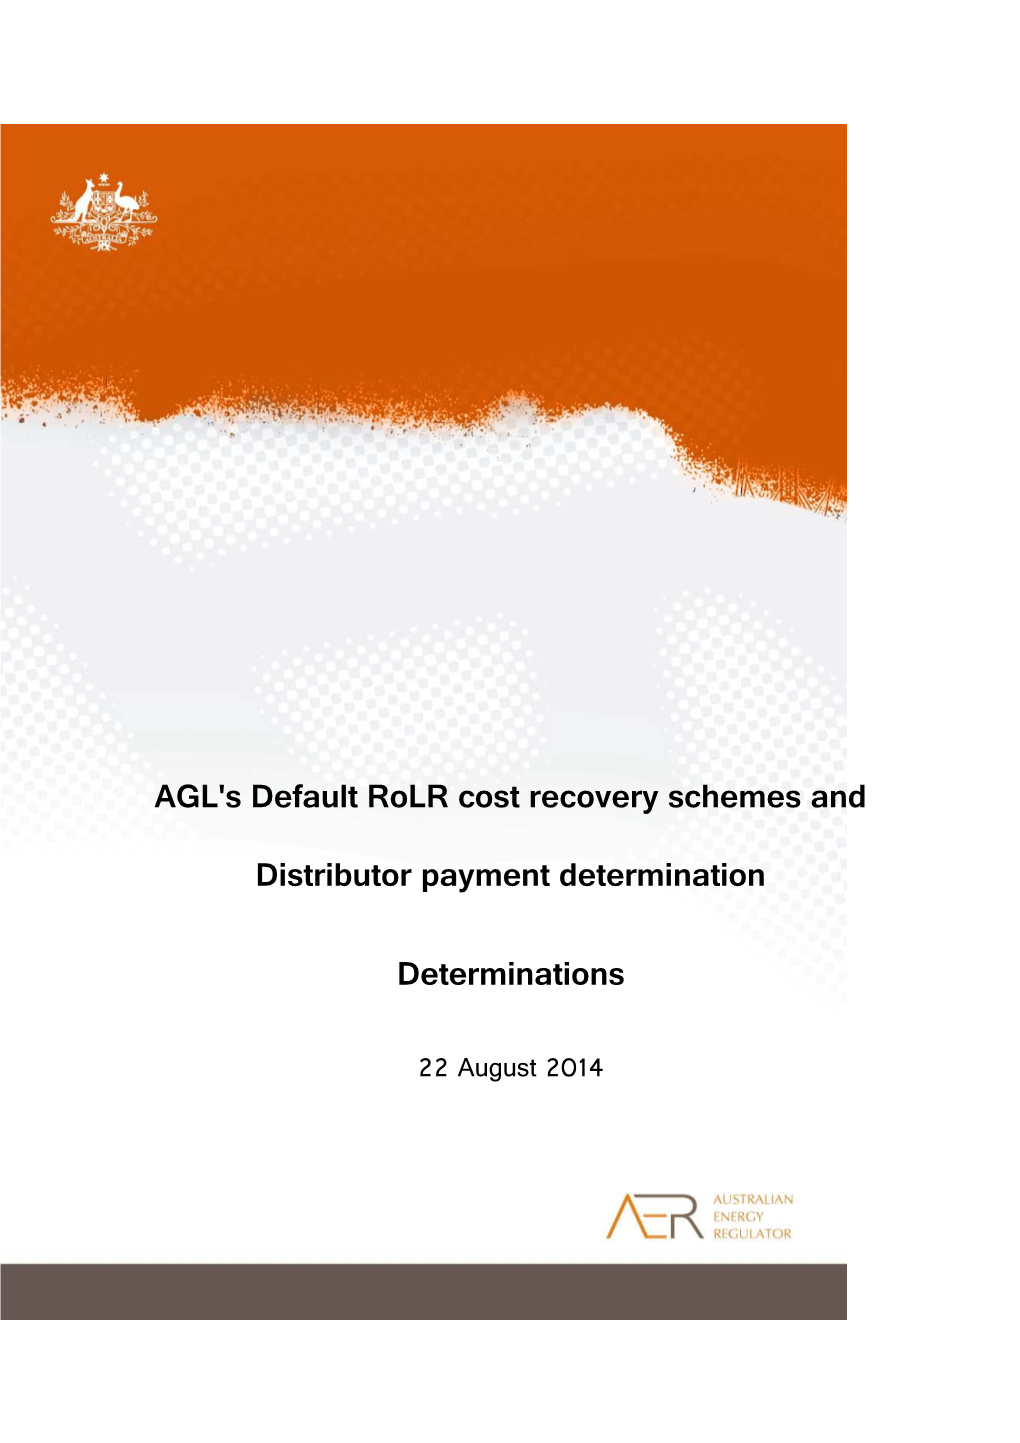 AGL's Default Rolr Cost Recovery Schemes and Distributor Payment Determination - August 2014